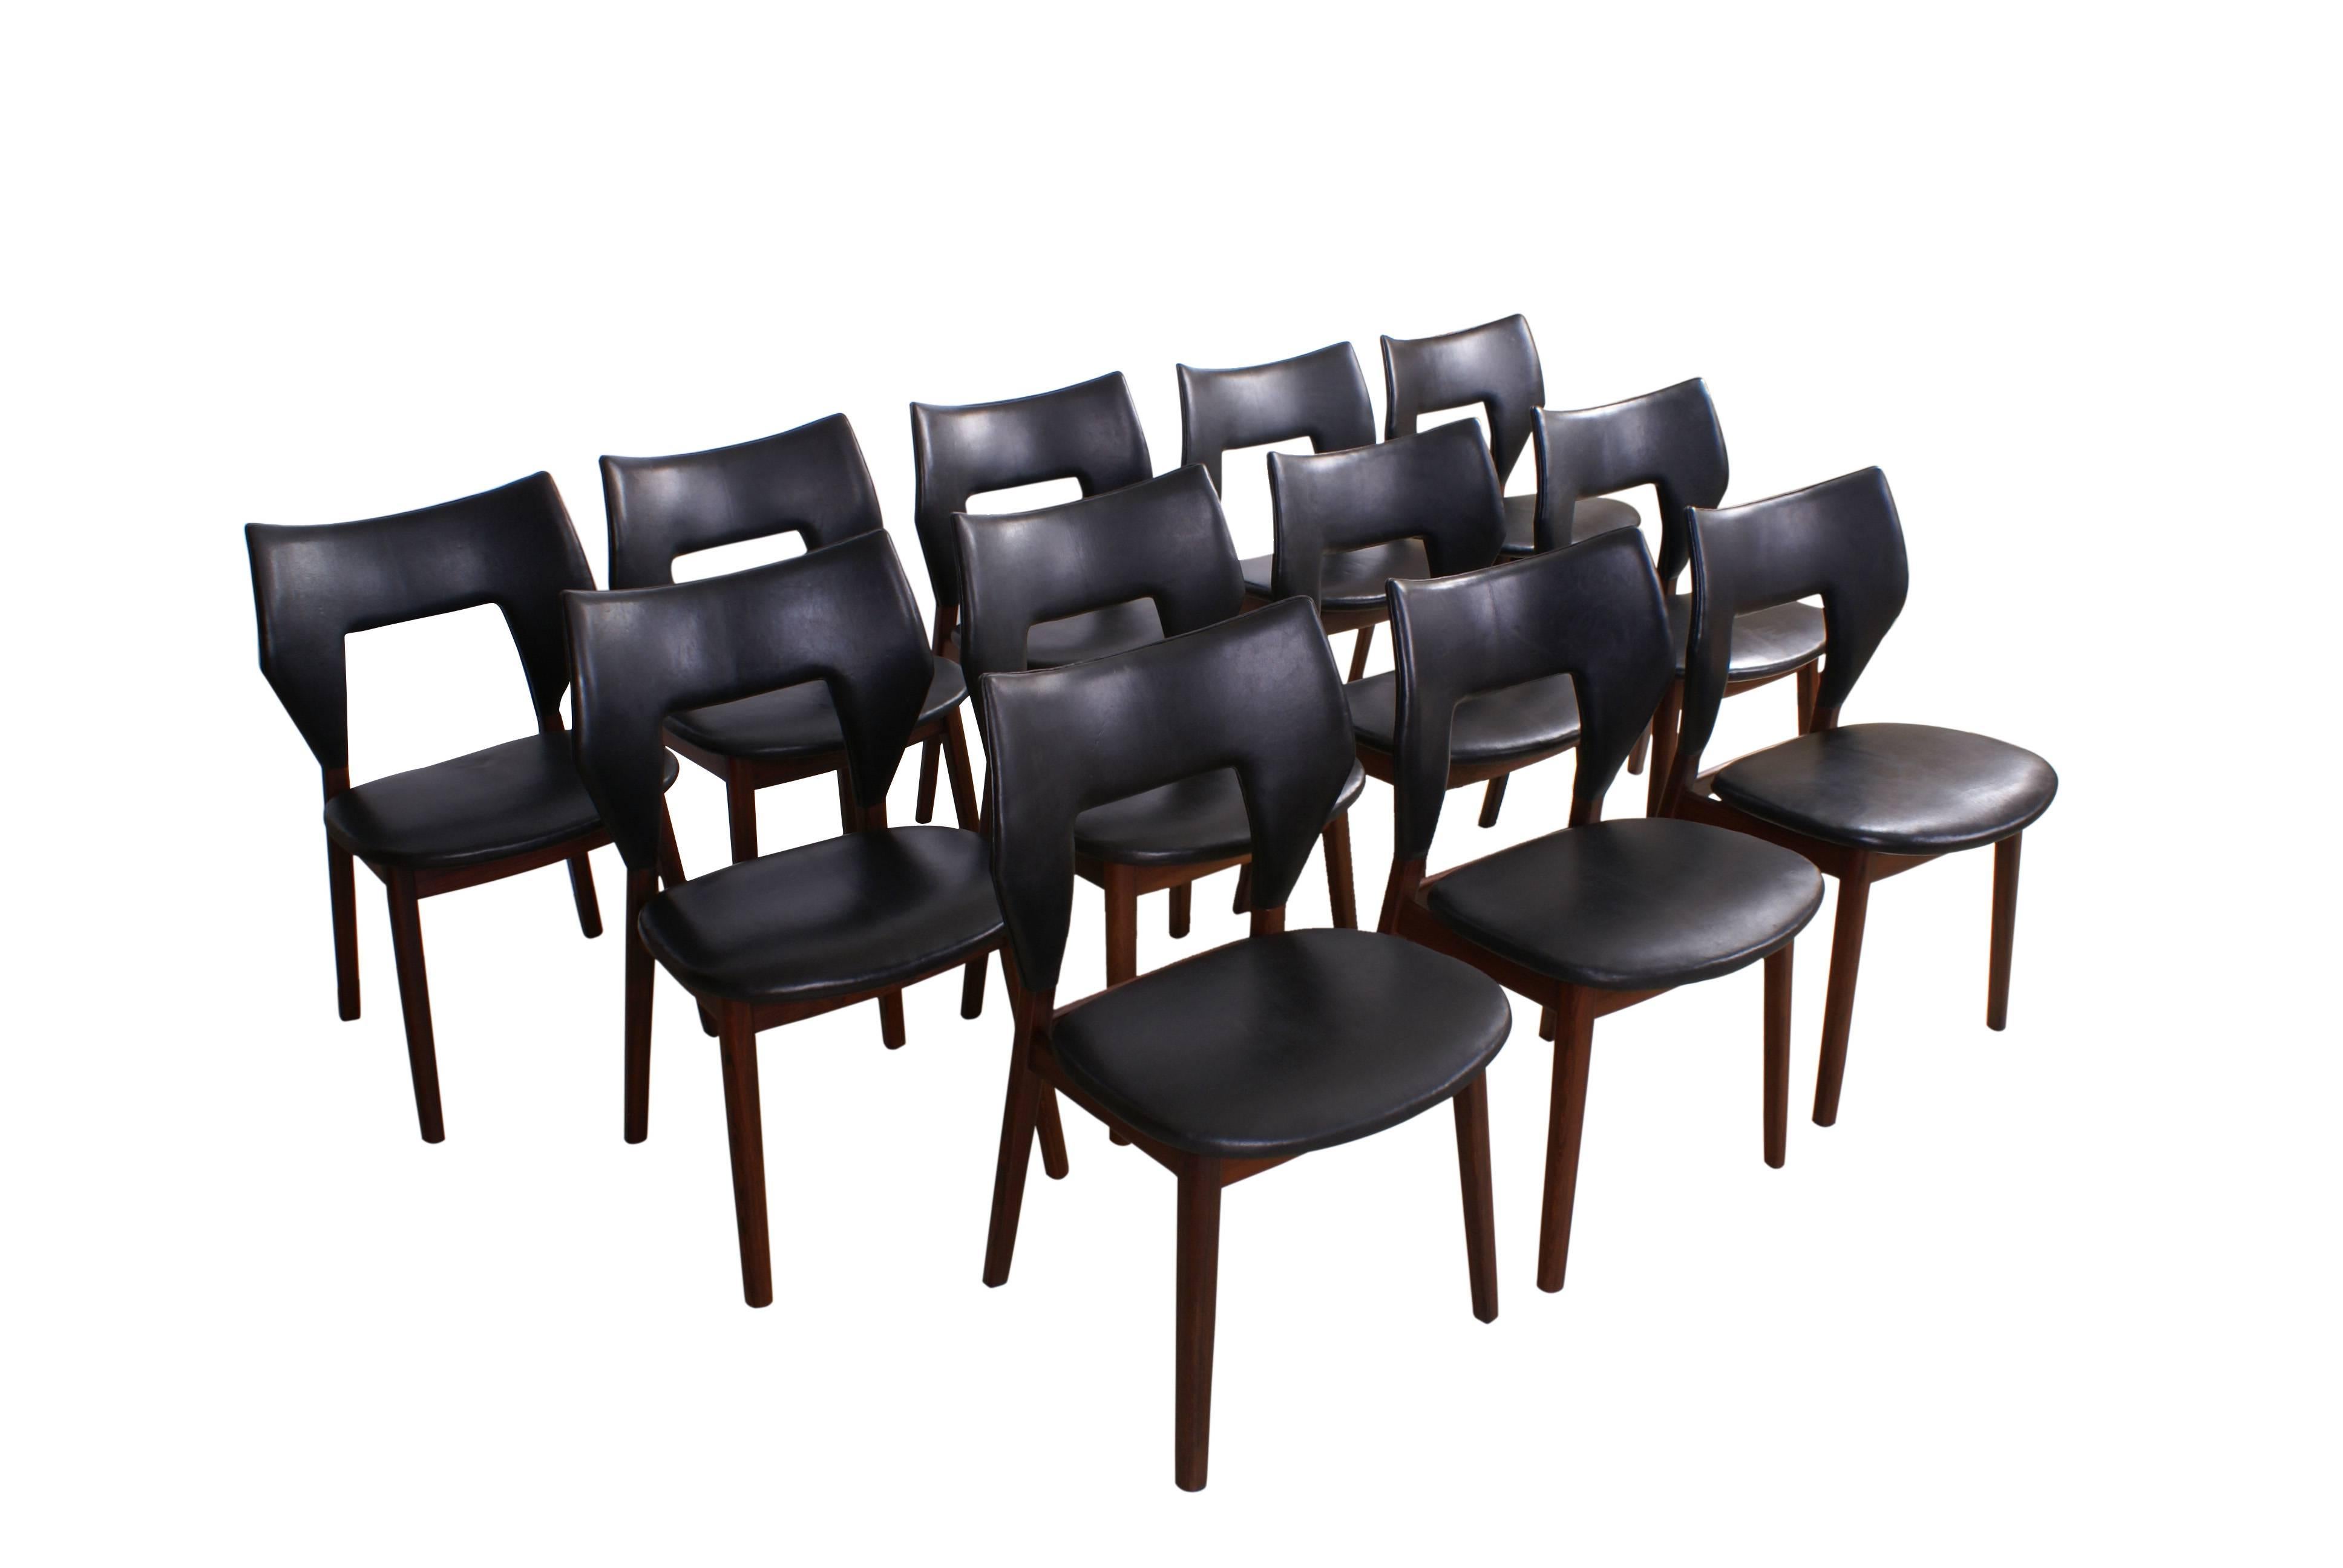 Tove & Edvard Kindt-Larsen, set of 12 sculptural dining Chairs in Brazilian rosewood and black leather. Designed 1960.

All chairs with metal plaque from master cabinetmaker Thorald Madsen.

This is an exceptional and rare set of dining